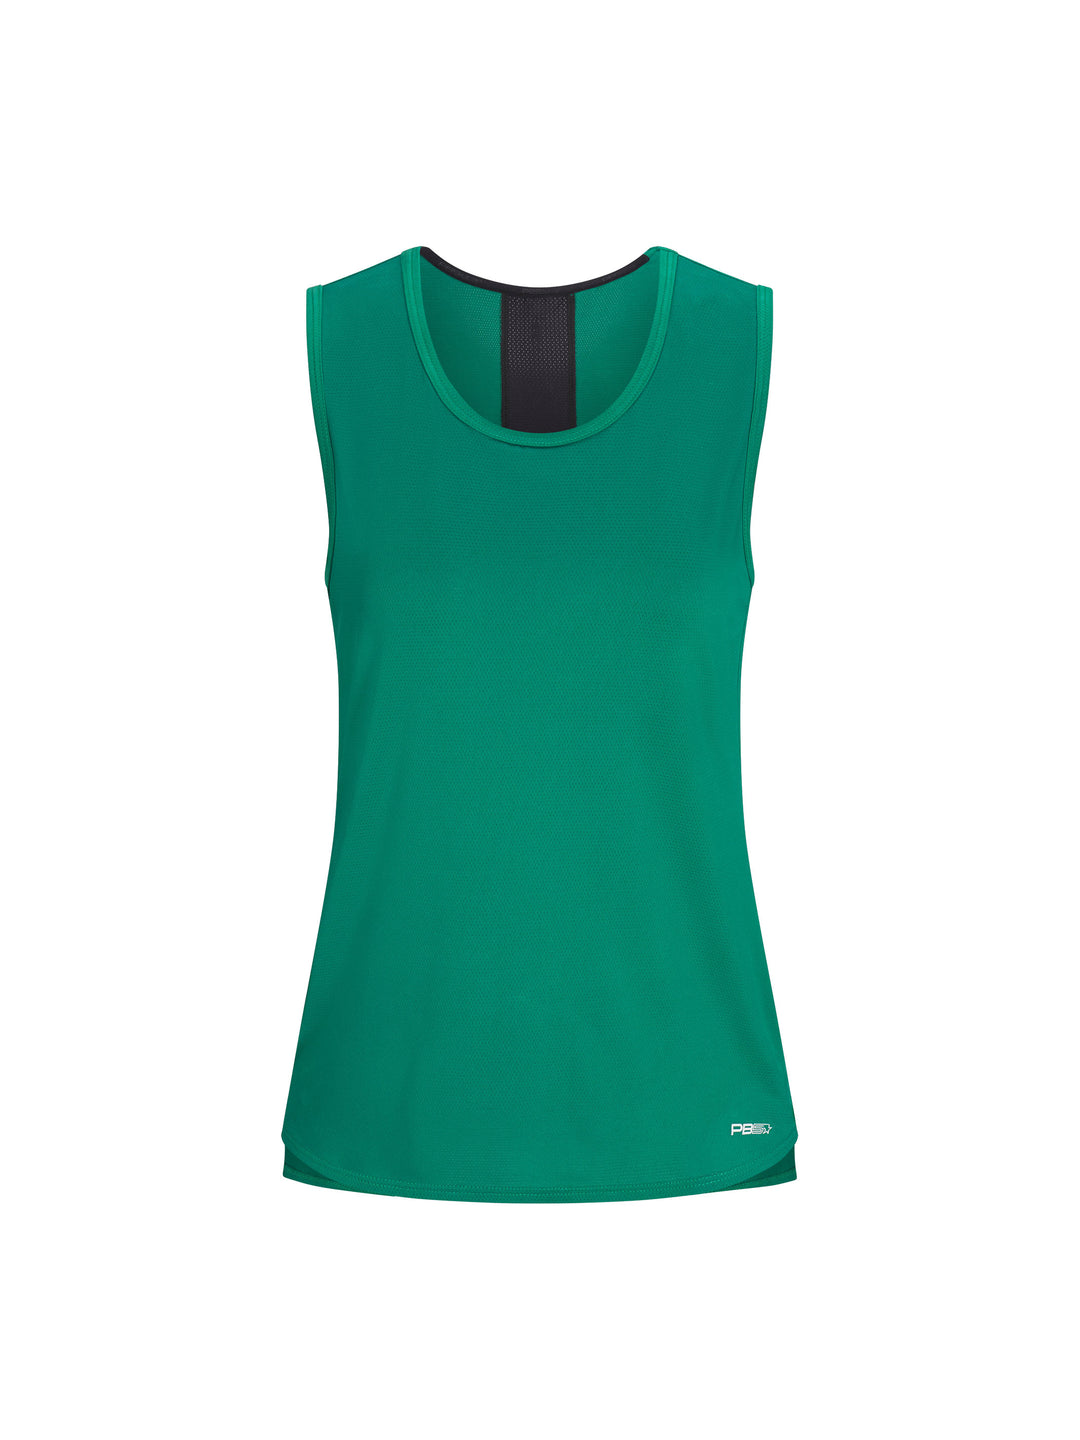 Women's Vented Tank front view in jade with black stripe down center back. Small logo on lower left side.